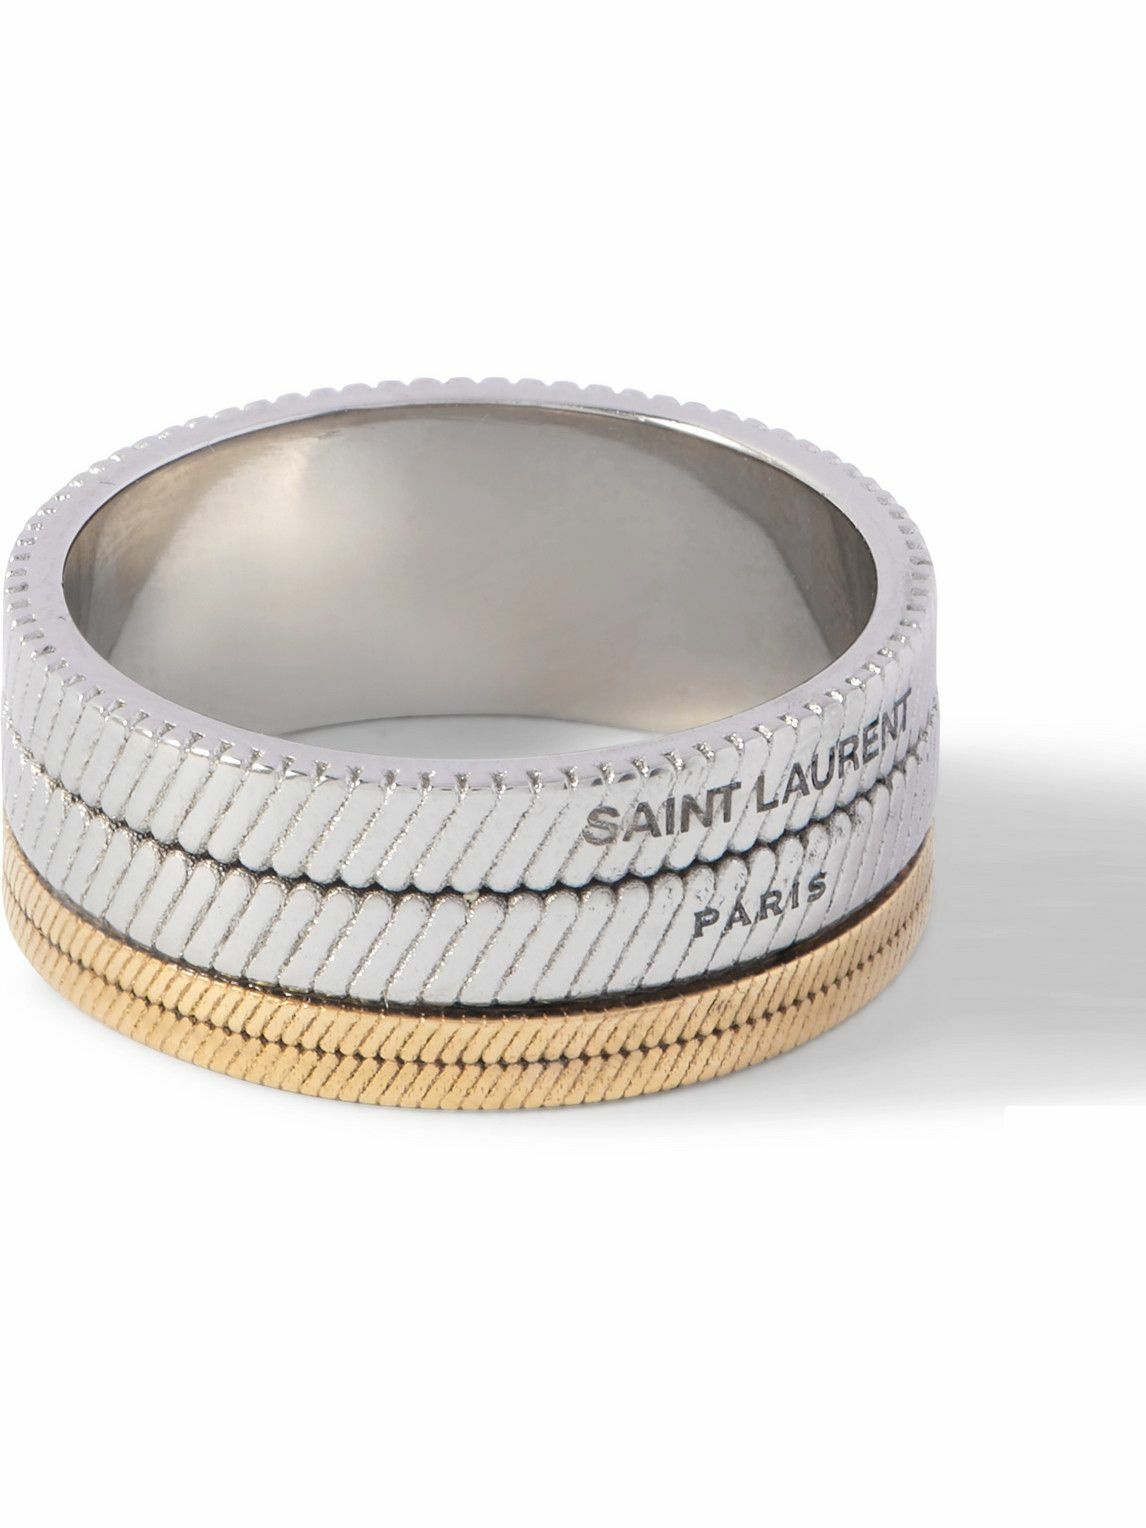 Photo: SAINT LAURENT - Tandem Silver- and Gold-Tone Ring - Silver